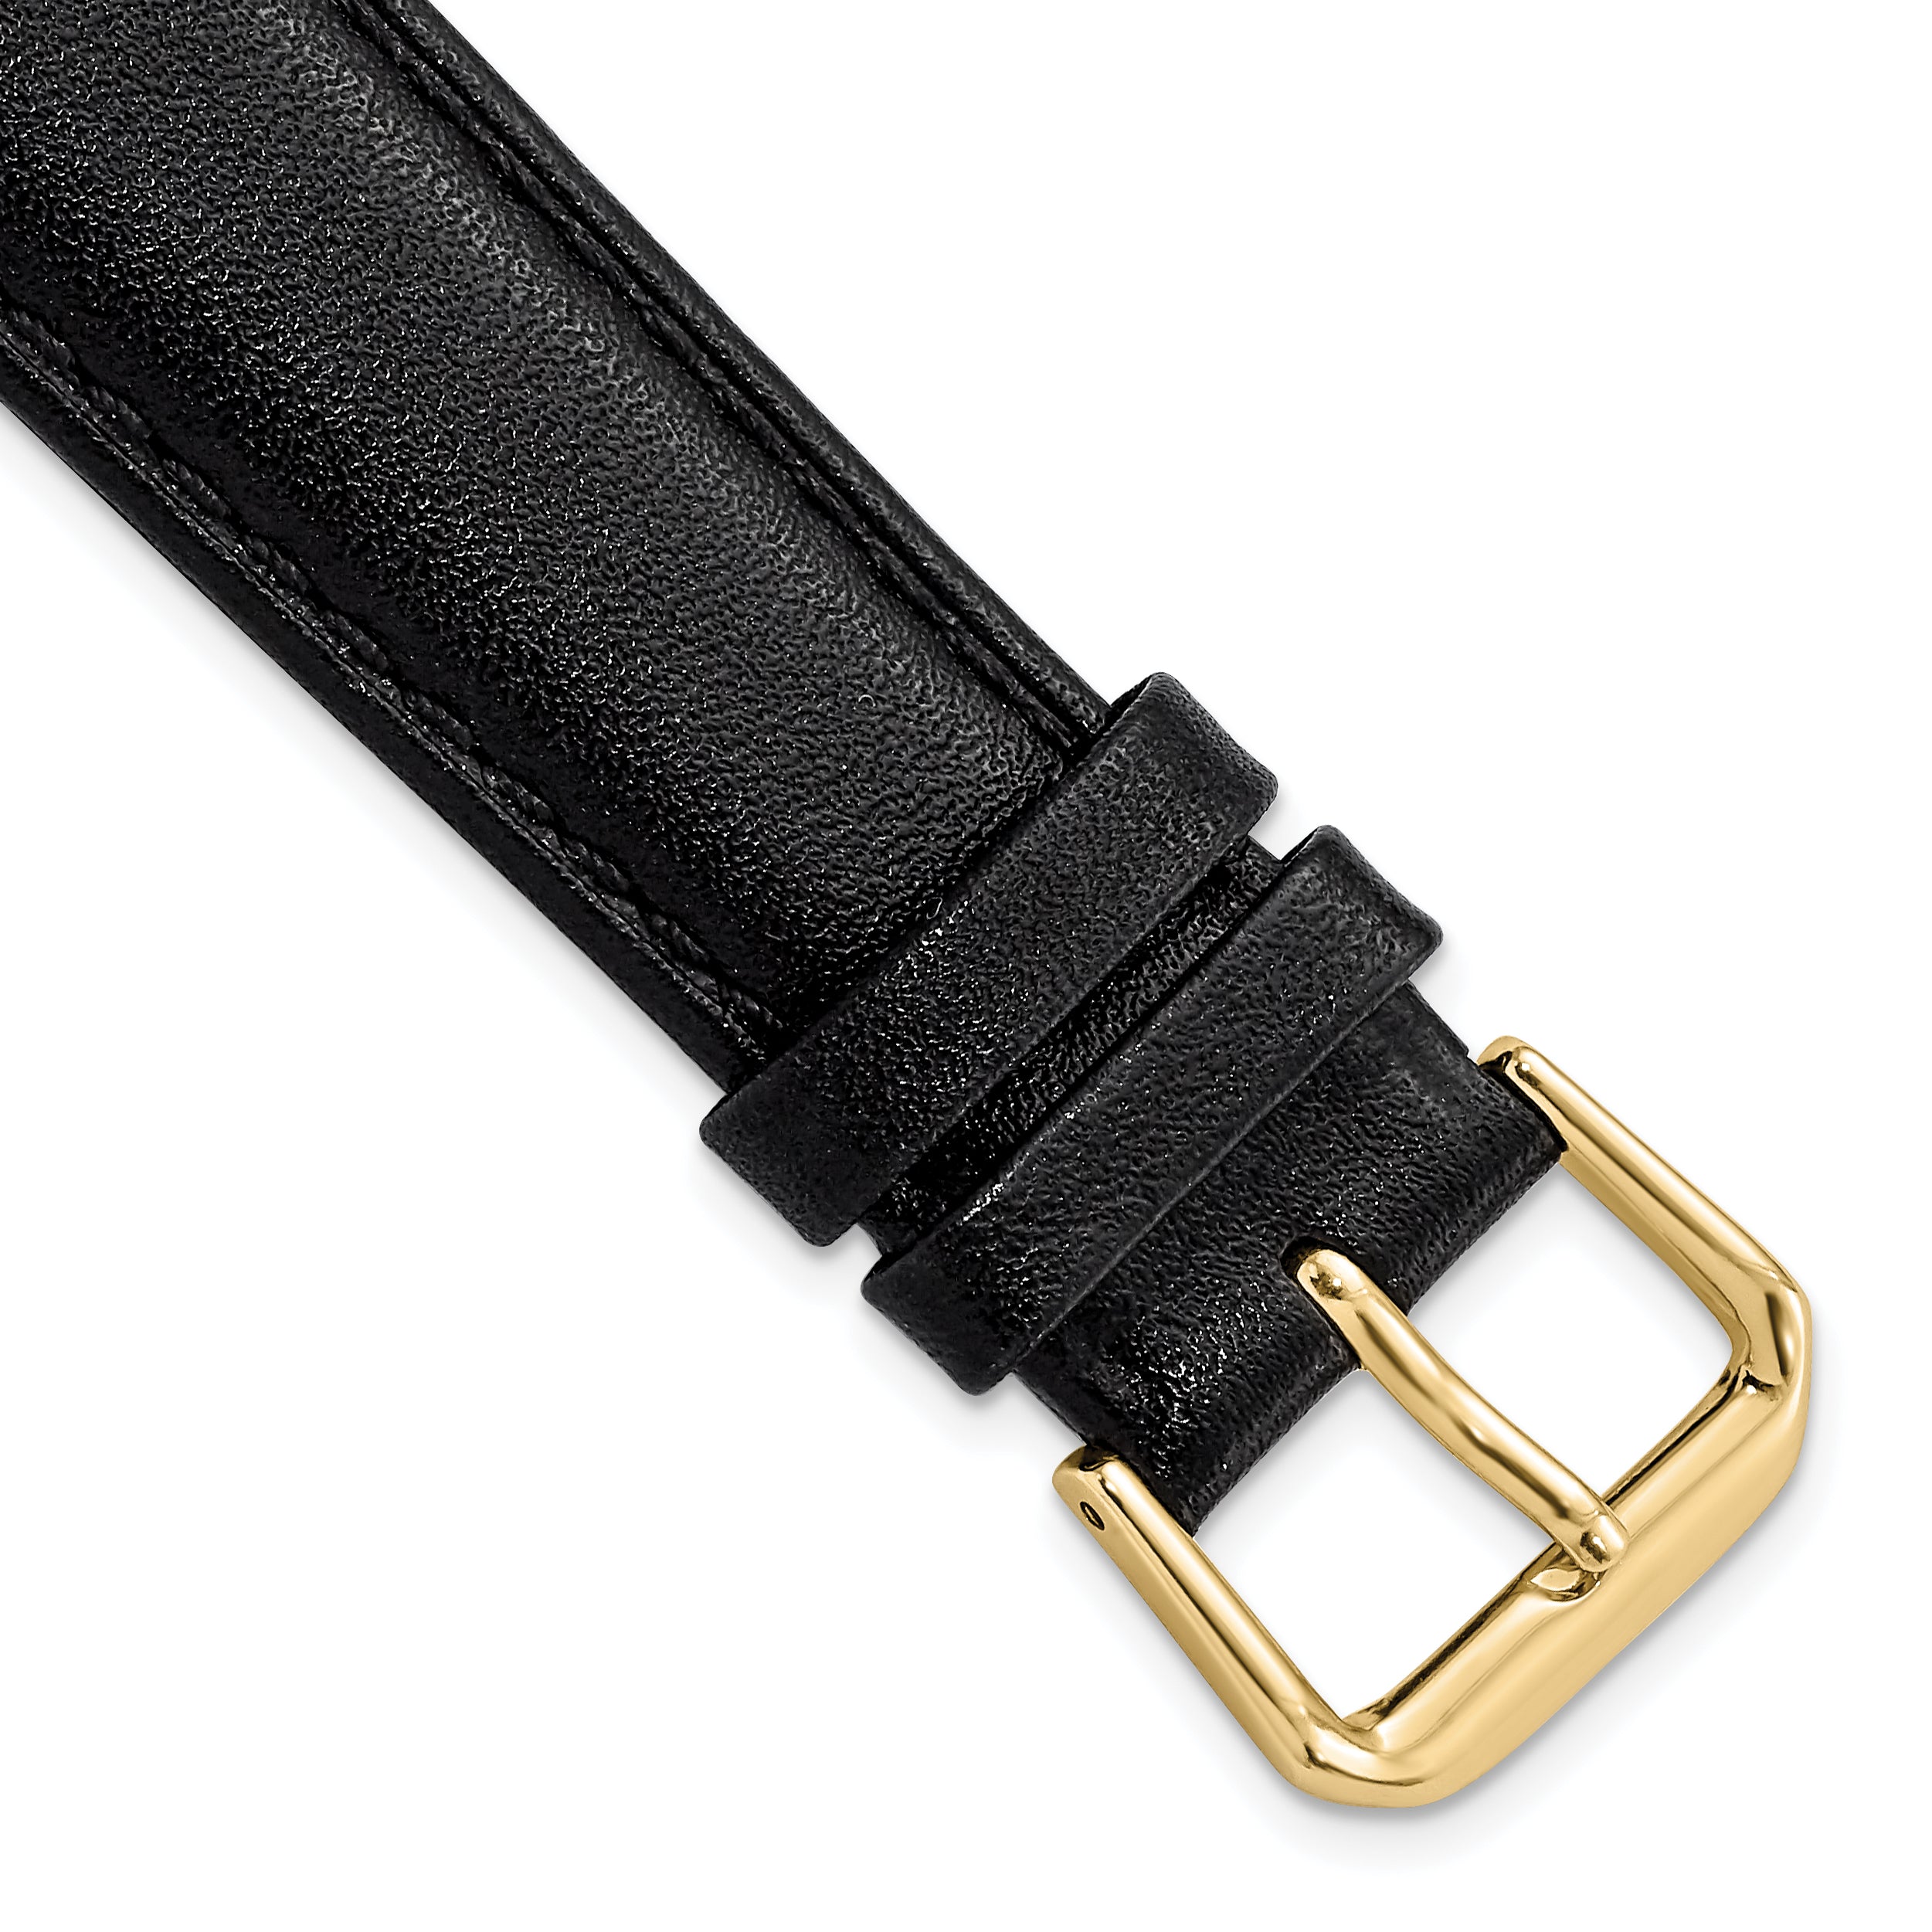 DeBeer 18mm Short Black Smooth Leather with Gold-tone Buckle 6.75 inch Watch Band